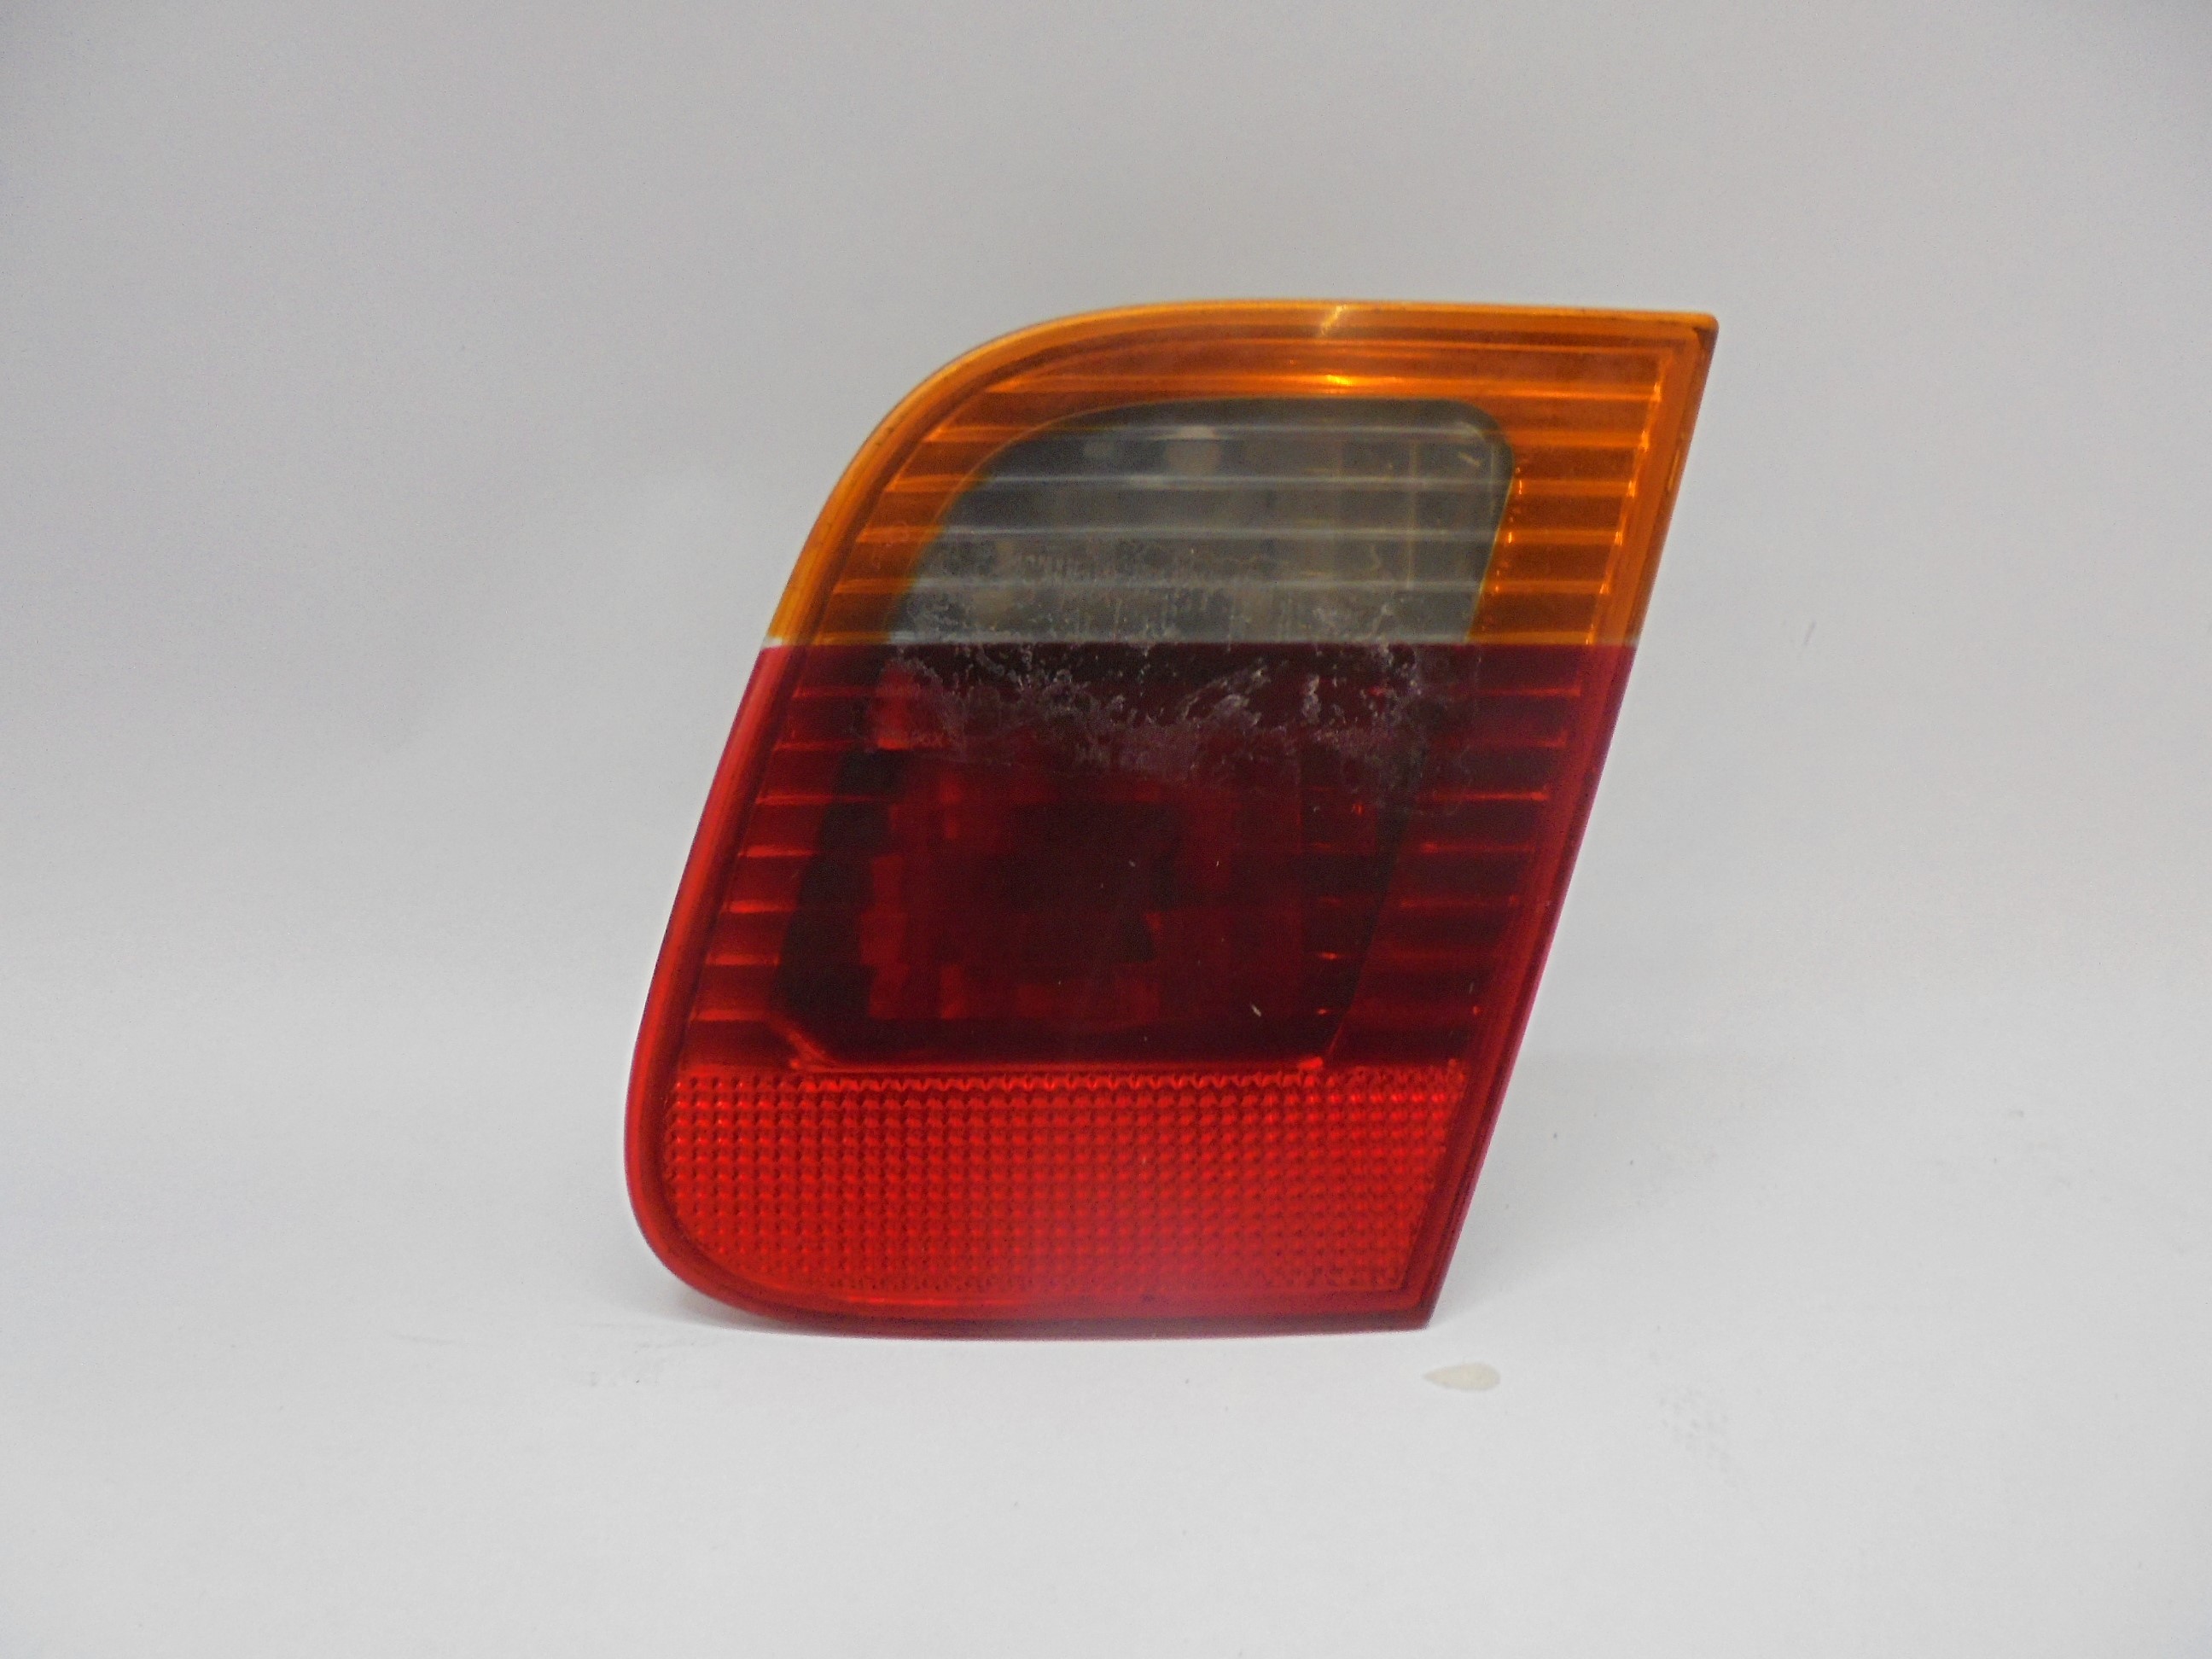 BMW 3 Series E46 (1997-2006) Rear Right Taillight Lamp 63216907946 25123600